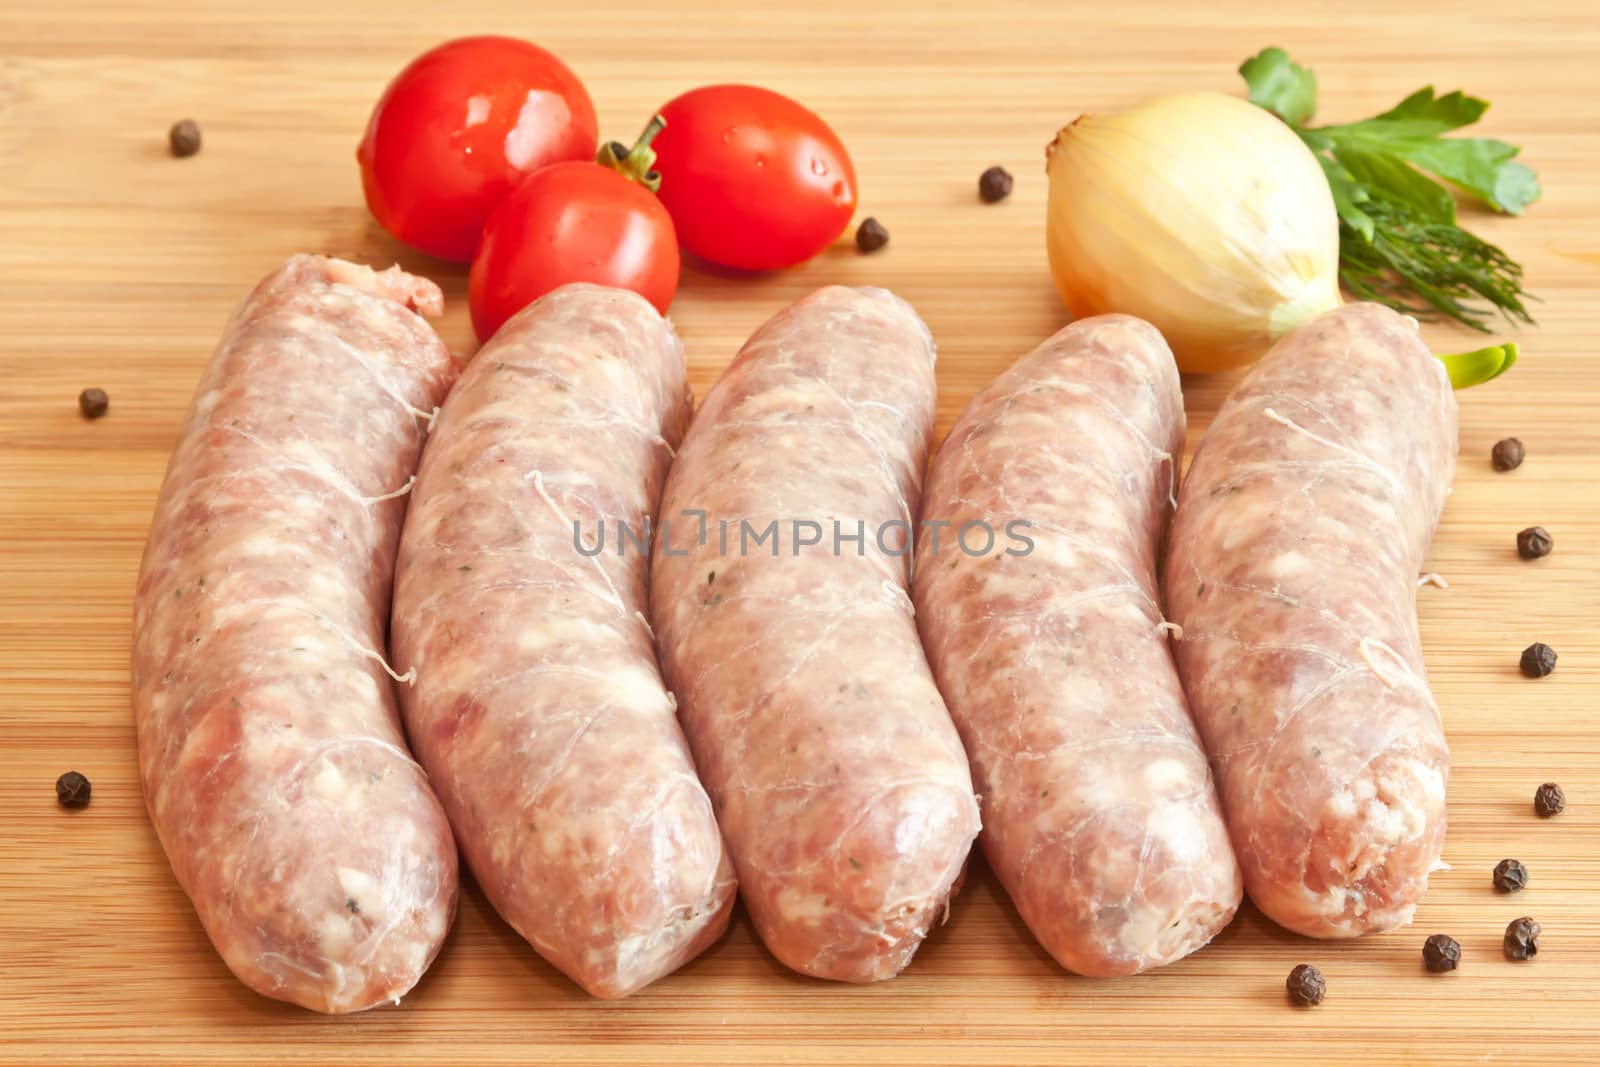 Uncooked sausage with vegetables on the chopping board
